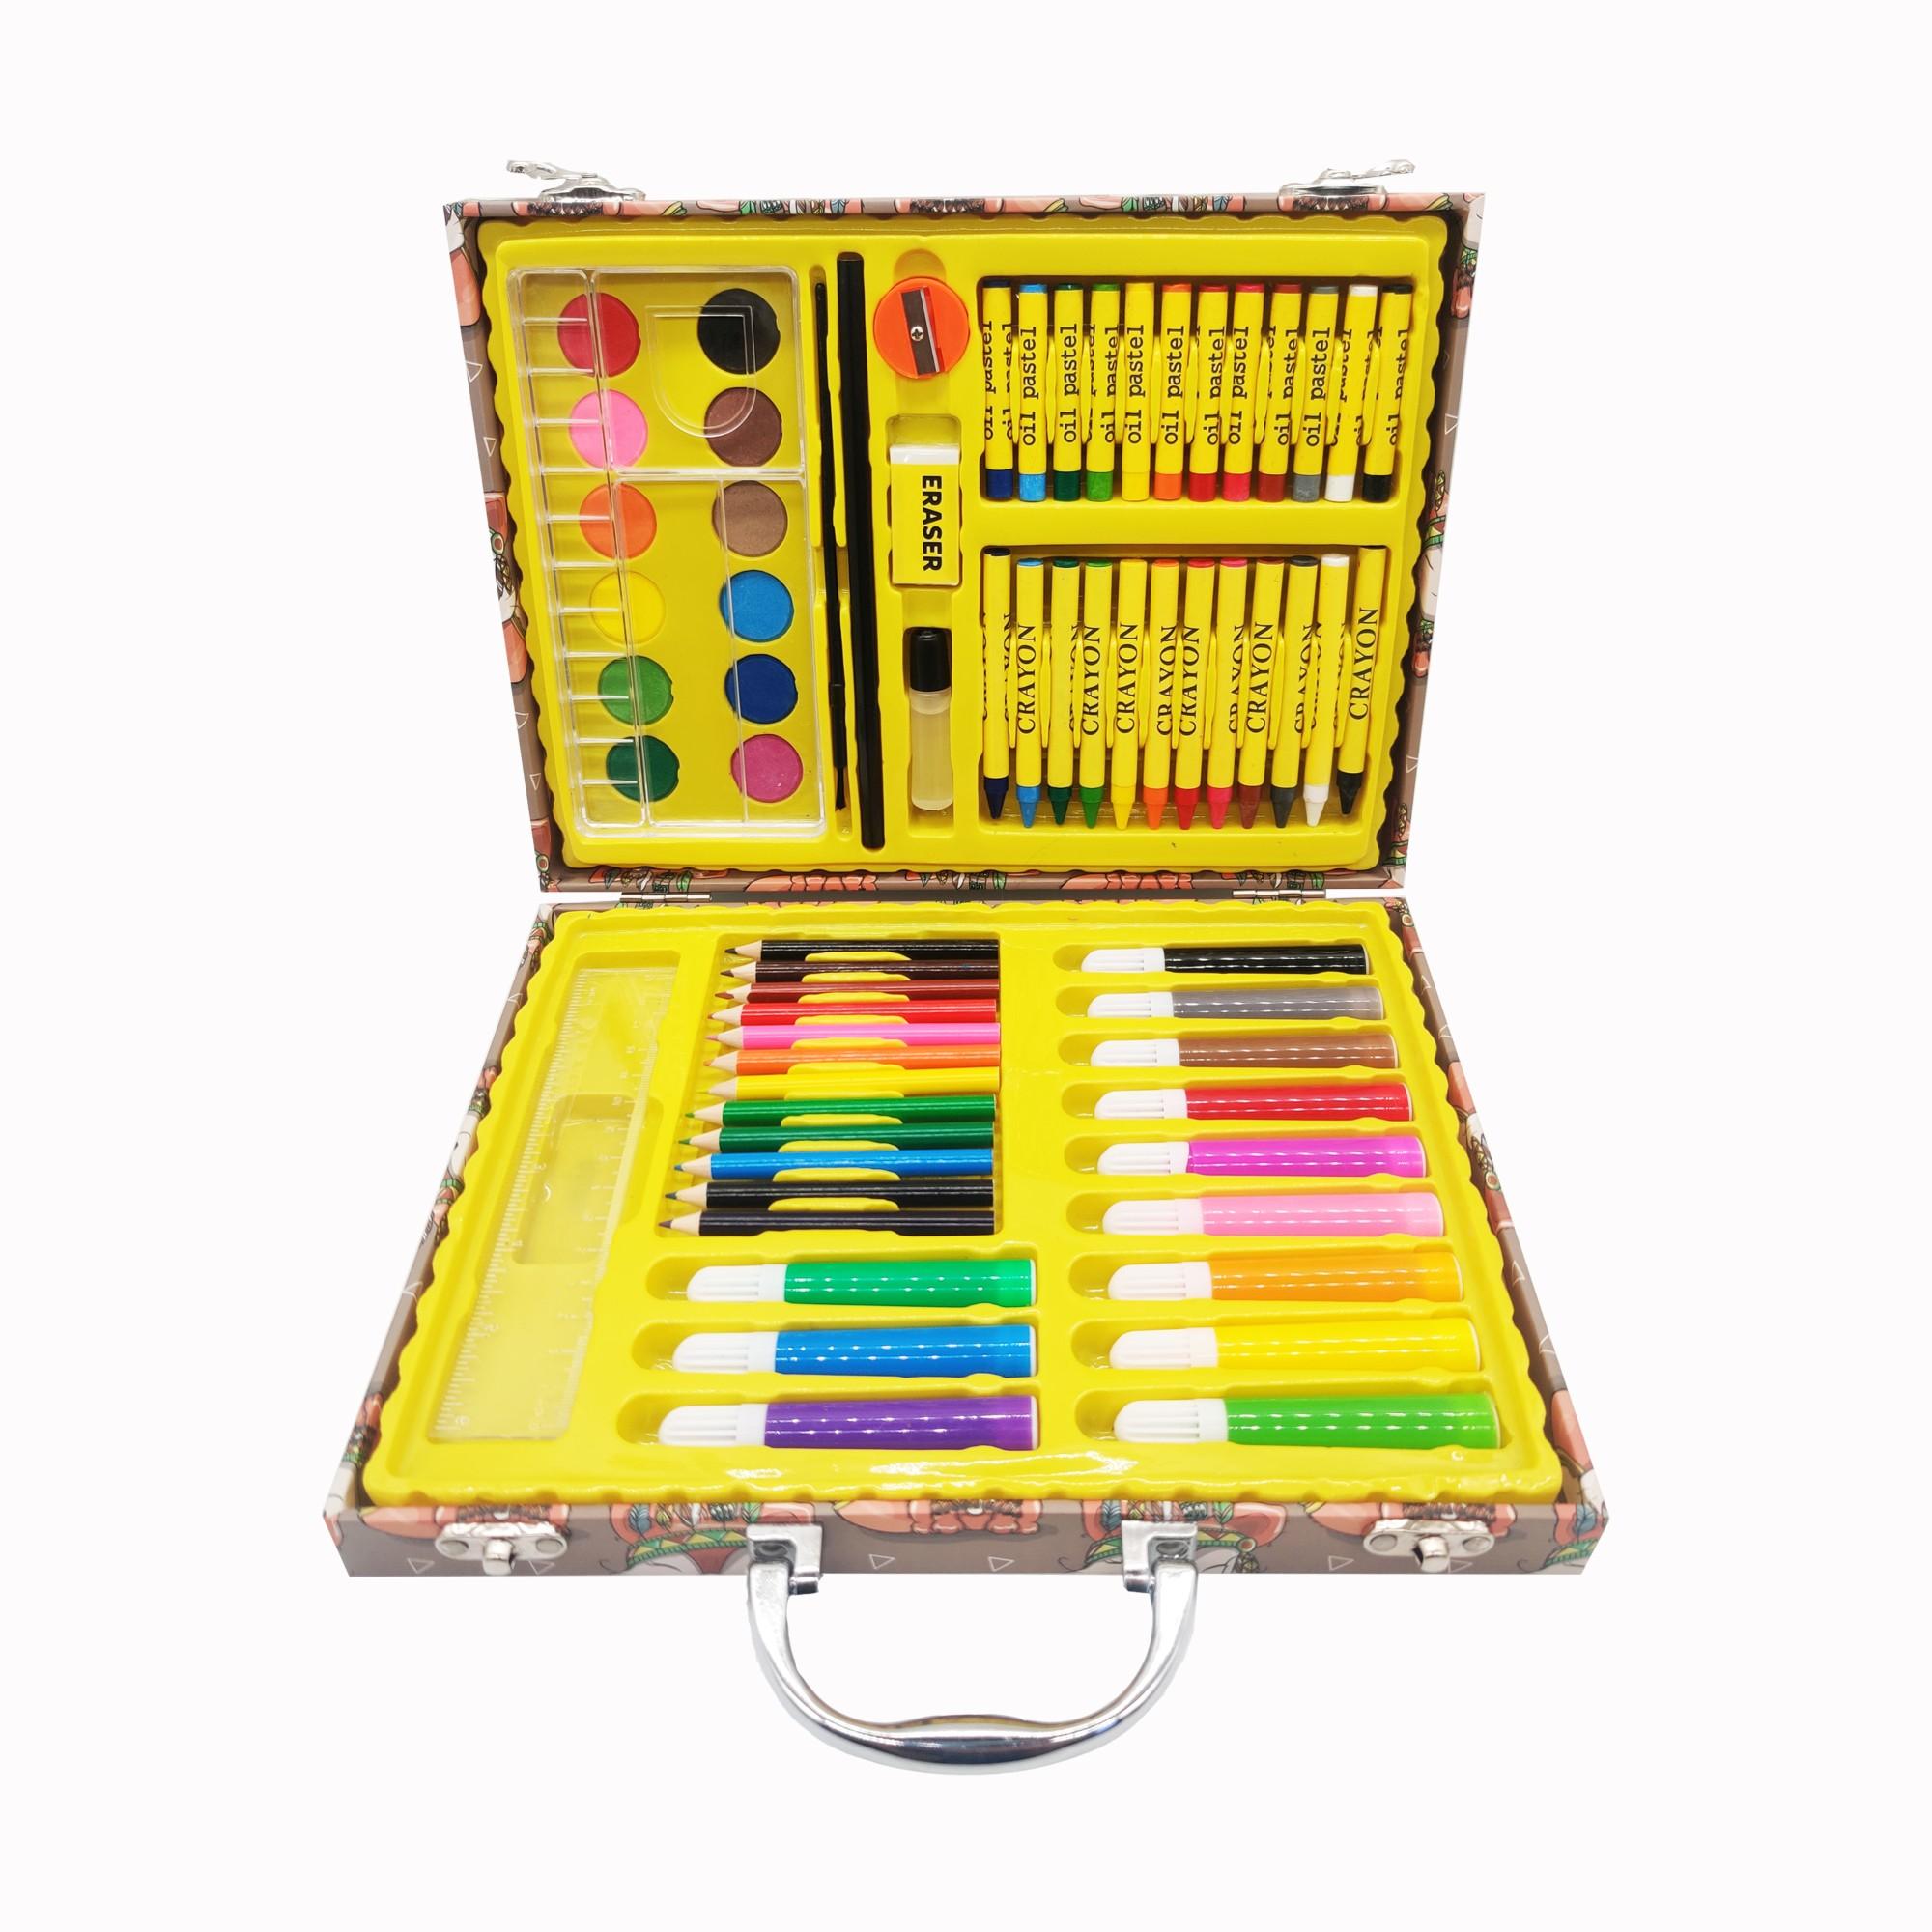 68 Pieces Children's Drawing Set Colorful Pencil Oil Painting Art Drawing Art Supplies Set Stationery Kit Gift For Kids